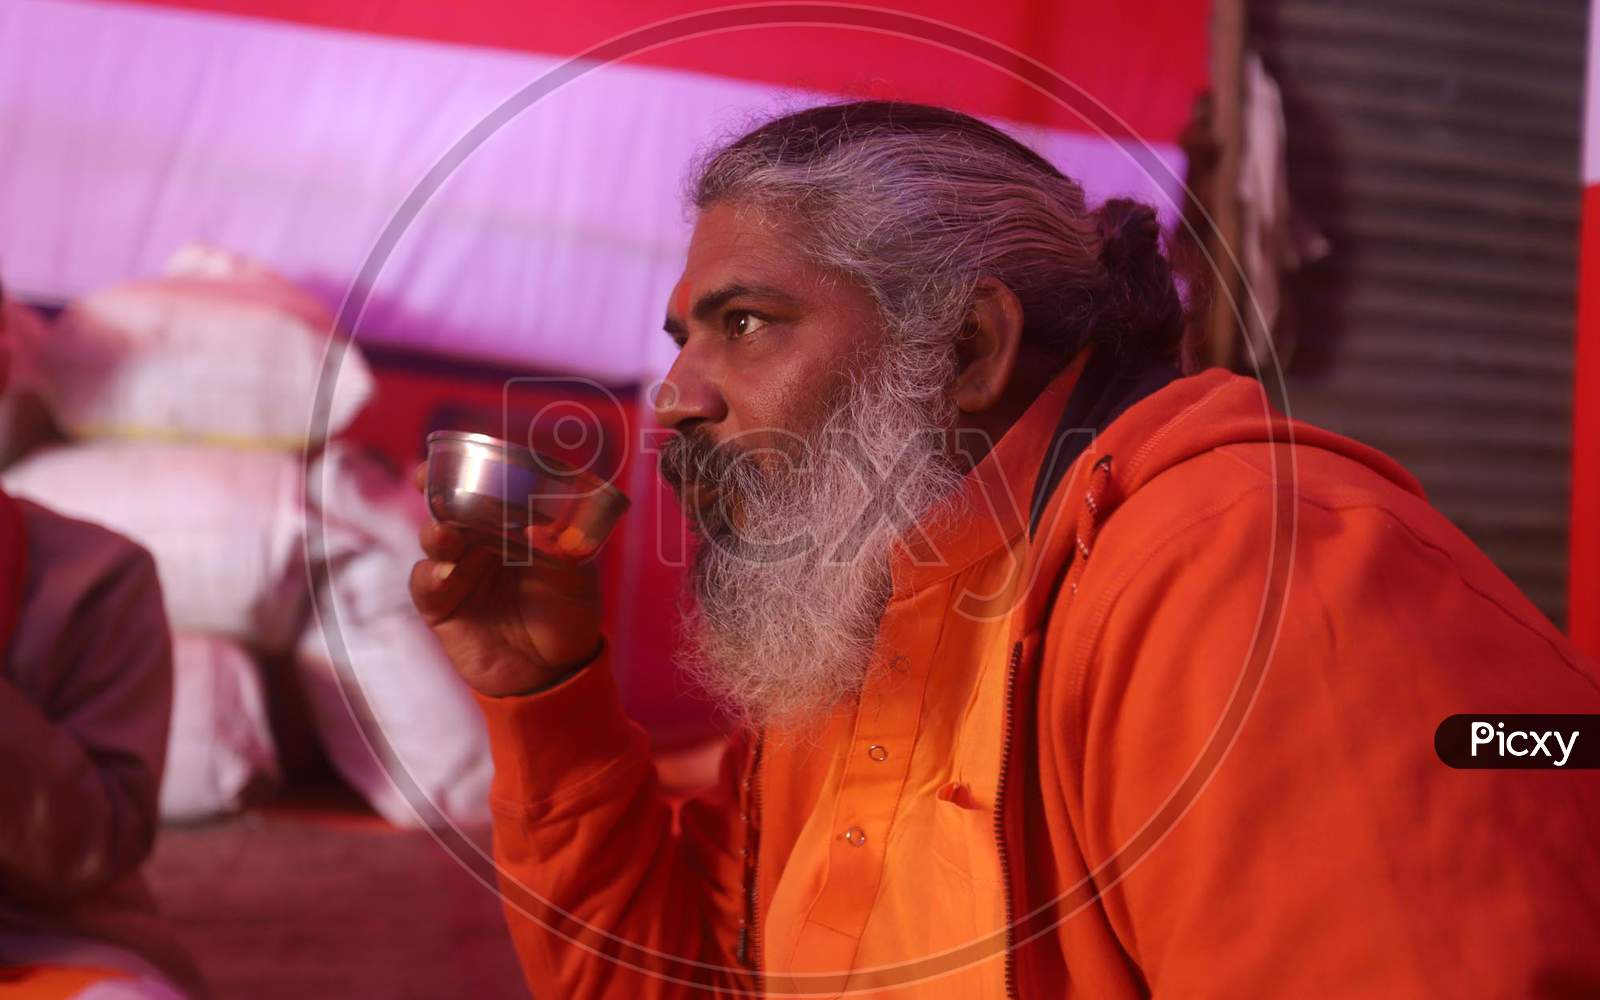 A Sadhu Or Holy Man Drinking Tea On A Cold And Fogy Weather In Side His Camp At Kumbh Mela In Allahabad, January 3.2019.